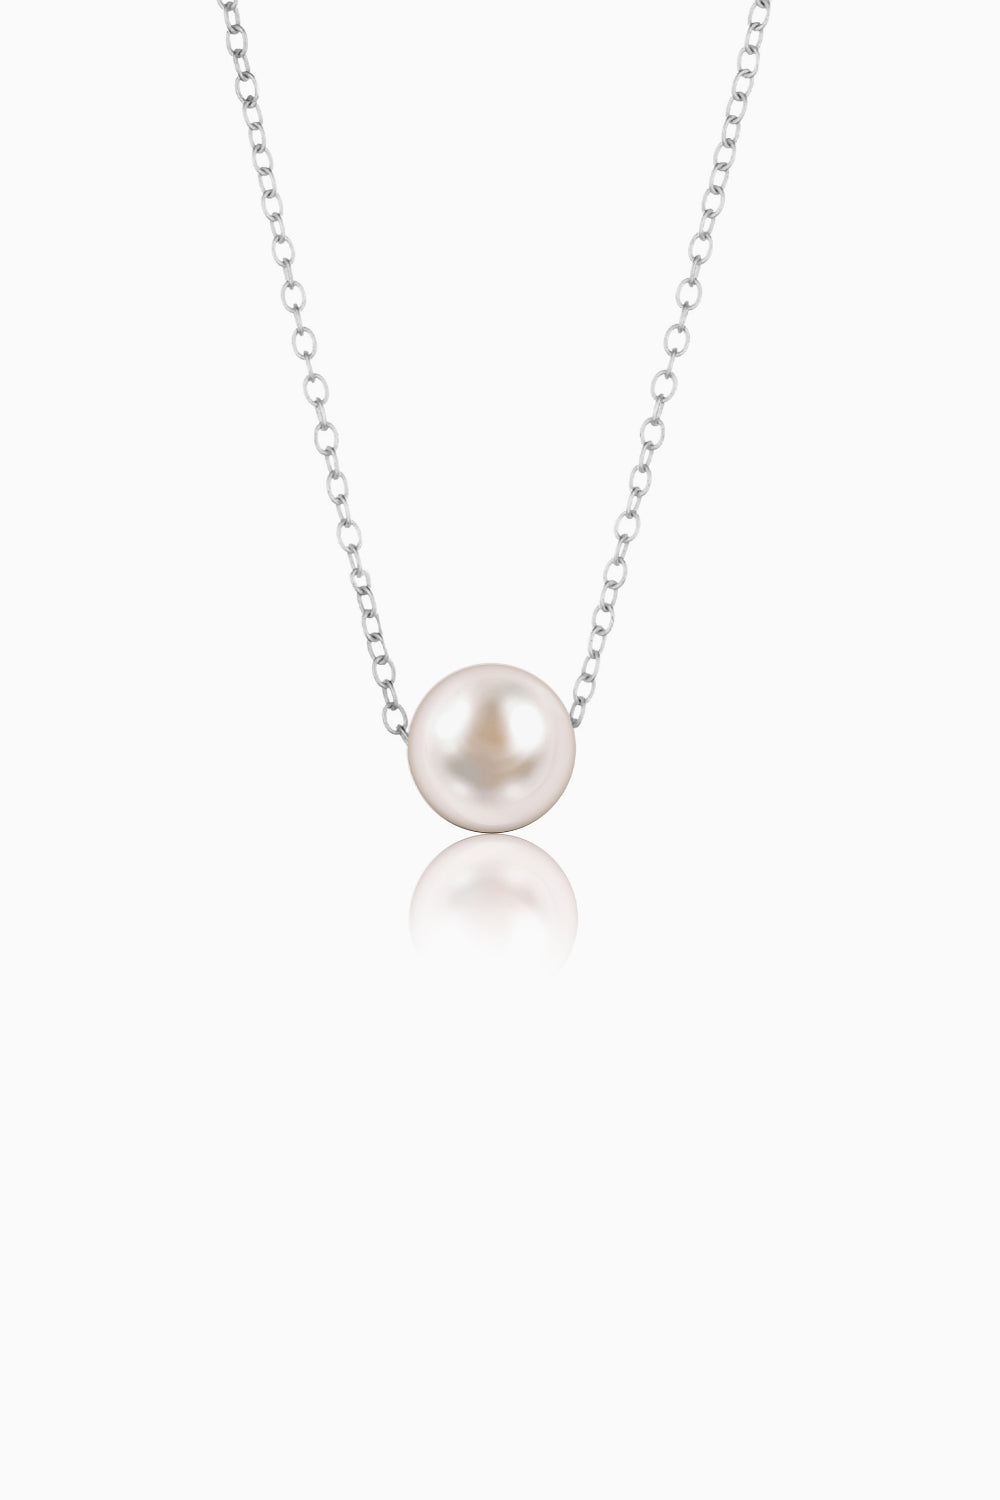 Necklace PEARL 925 silver